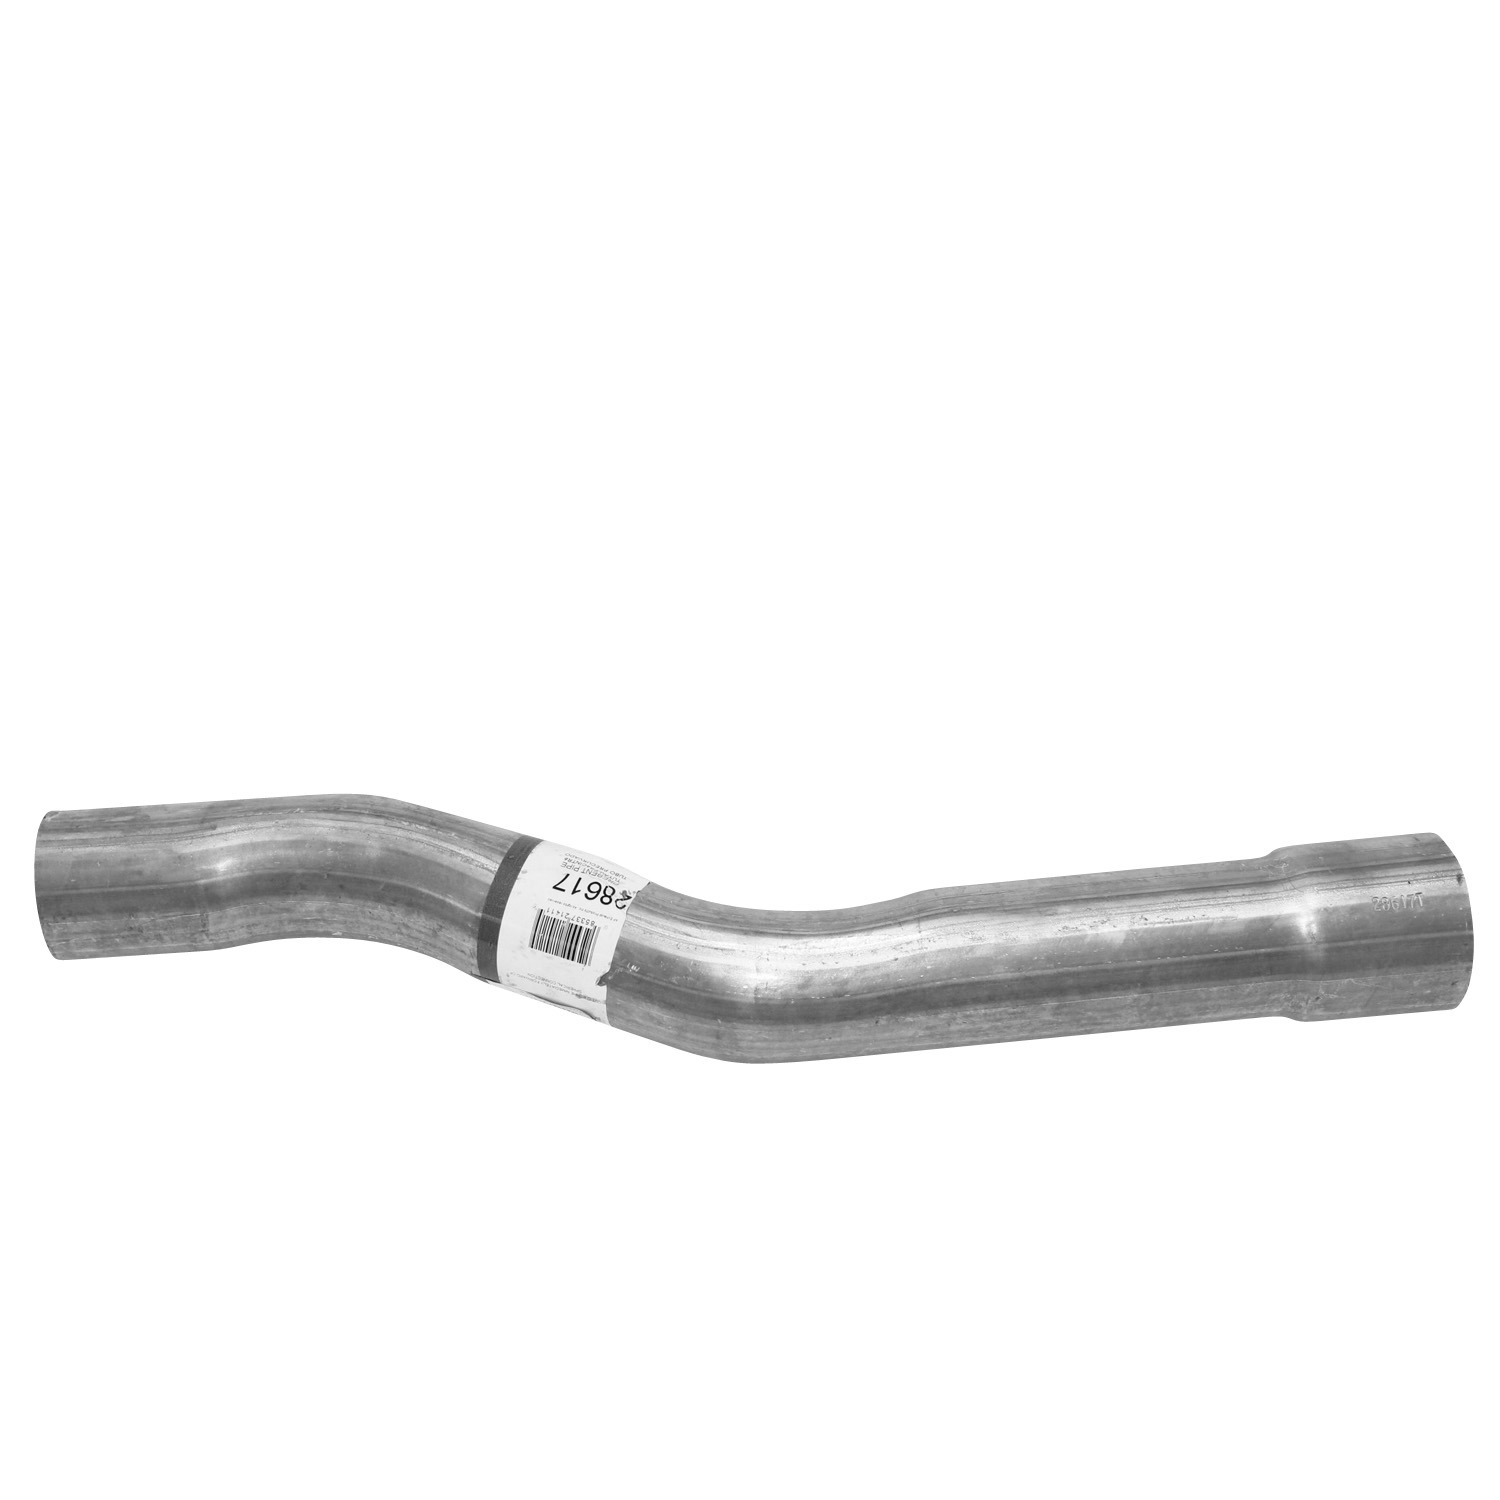 AP Exhaust Pipe Aluminized Steel for 00 - 02 Toyota Tundra 3.4L / 4.7L